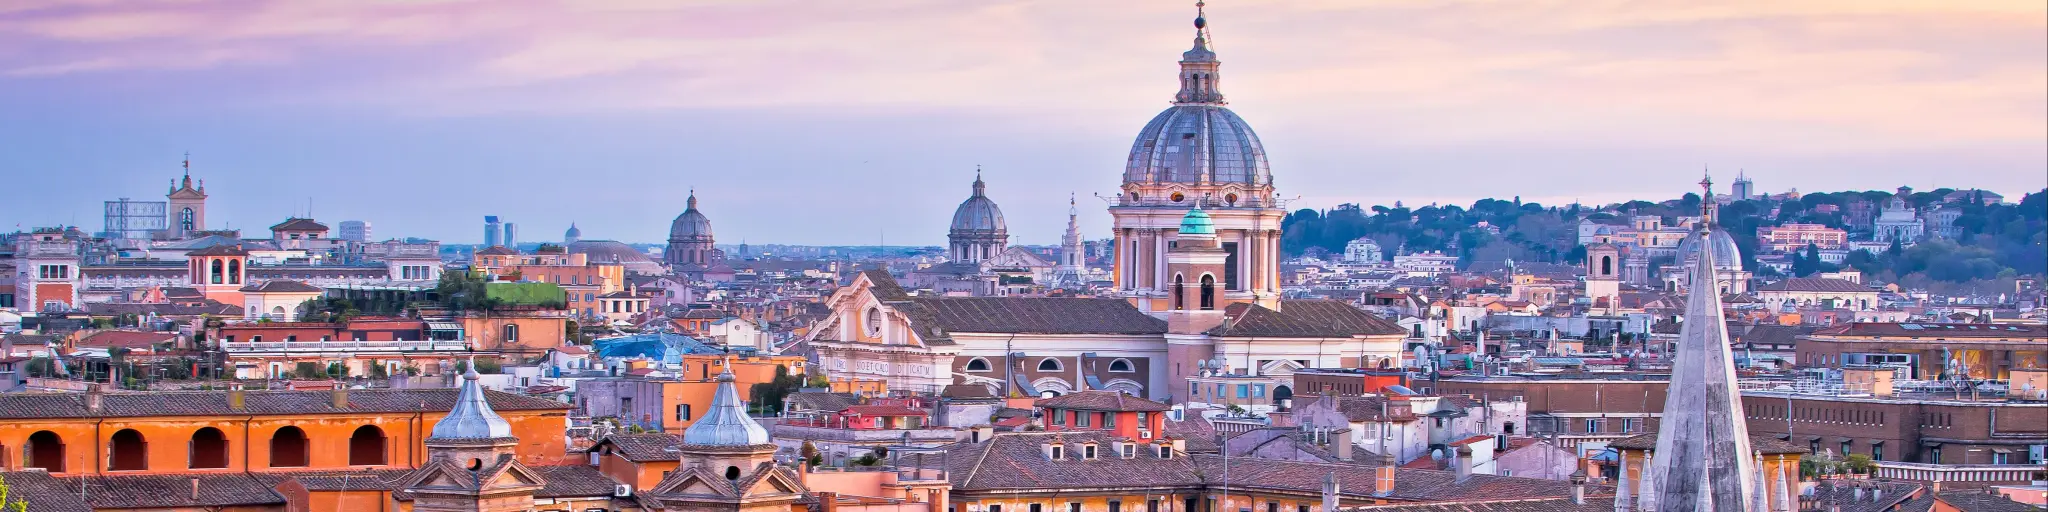 Rome rooftops and landmarks colorful sunset view, capital city of Italy